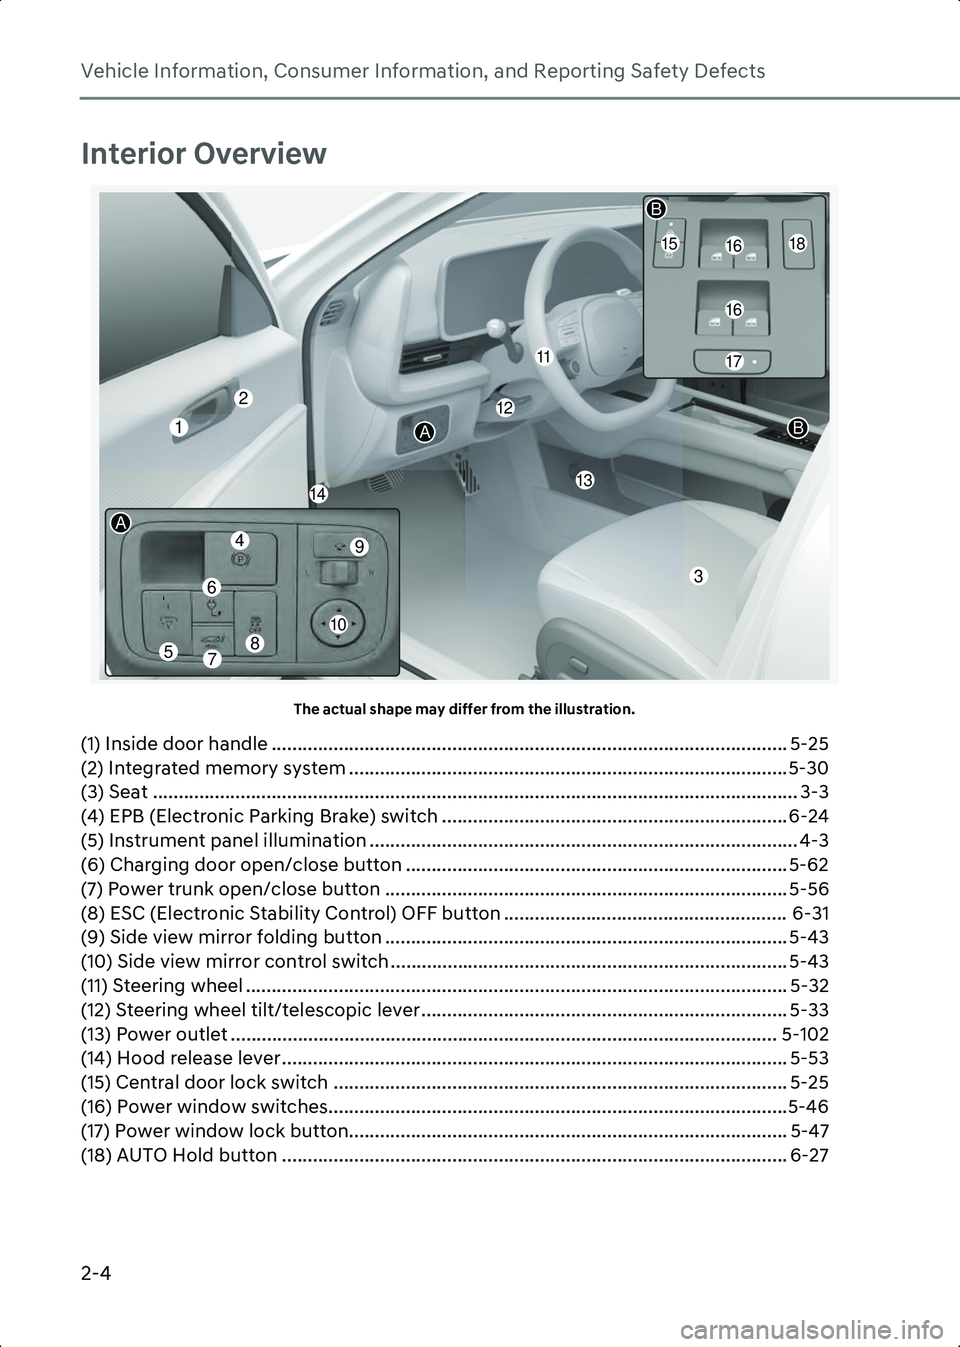 HYUNDAI IONIQ 6 2023  Owners Manual Vehicle Information, Consumer Information, and Reporting Safety Defects
2-4
Interior Overview
A1000501The actual shape may differ from the illustration.
(1) Inside door handle ........................